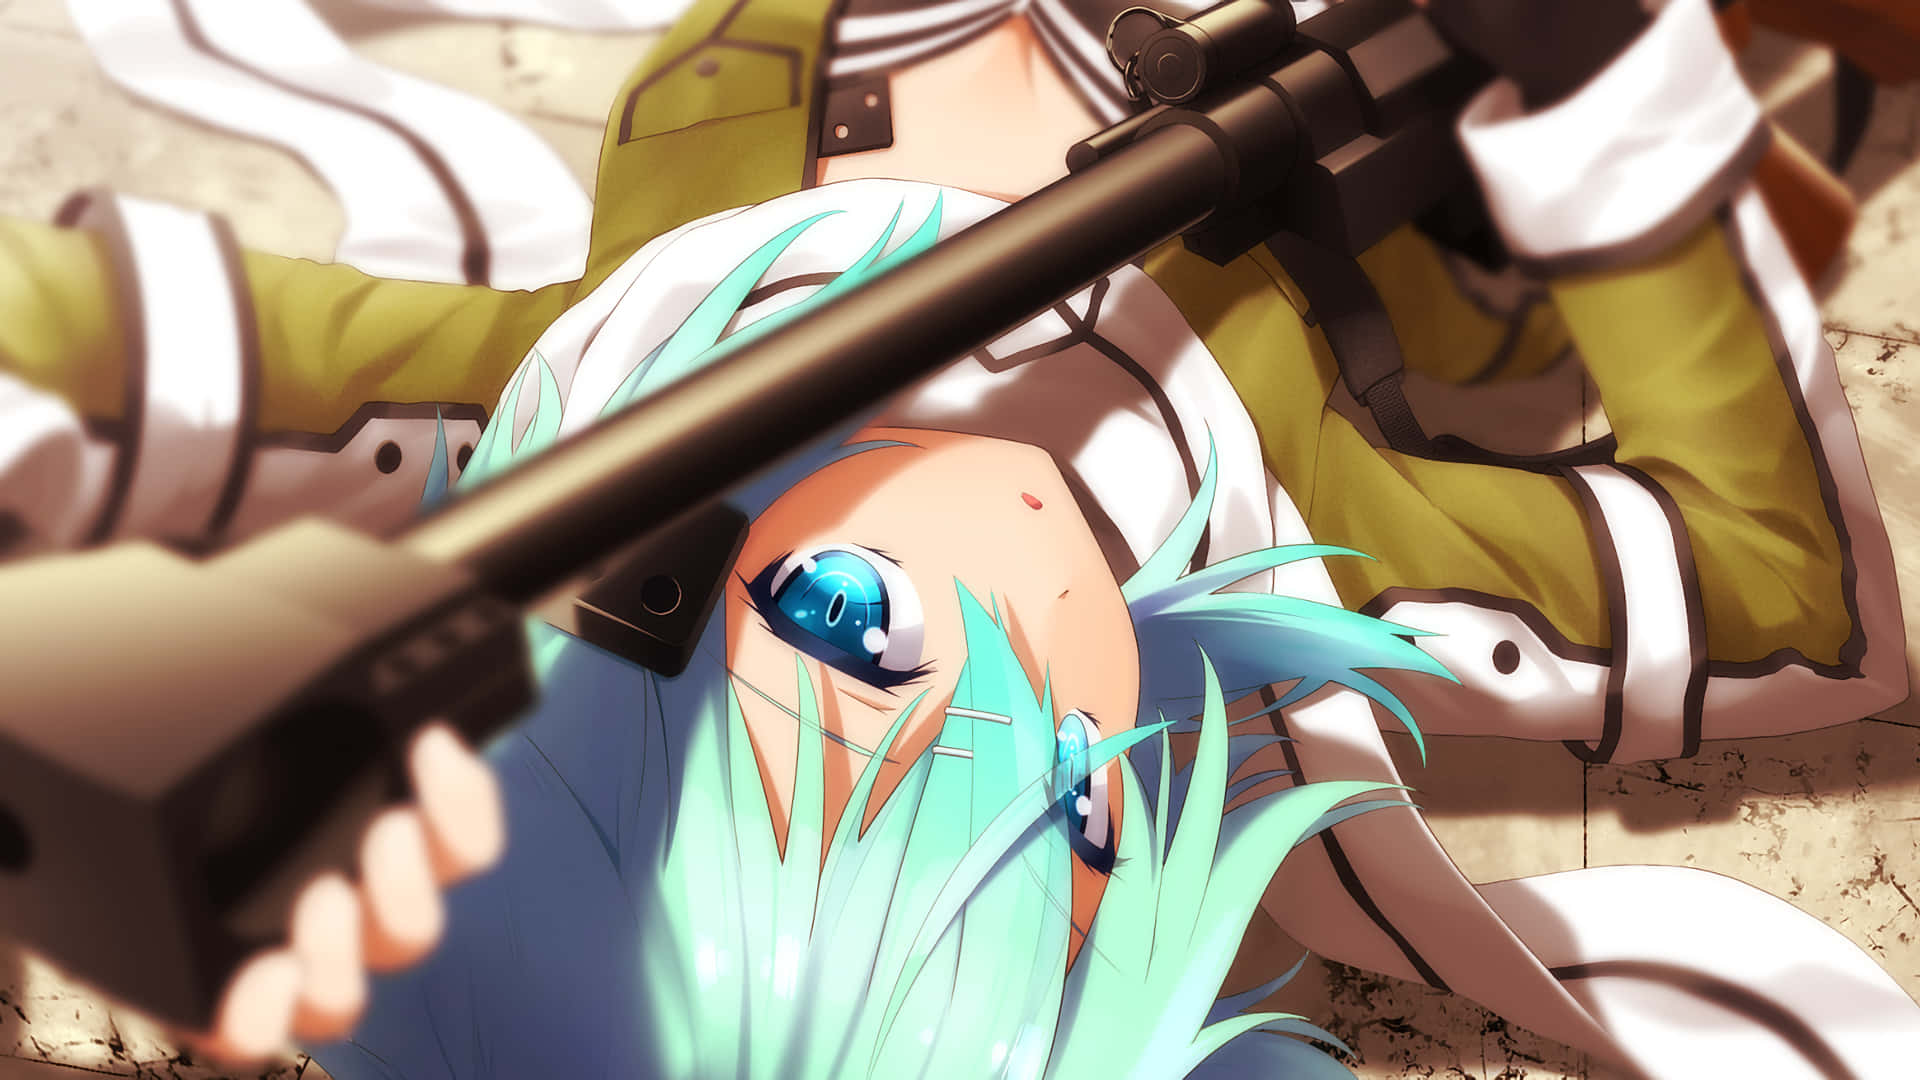 Sinon stands ready to fight in Sword Art Online. Wallpaper